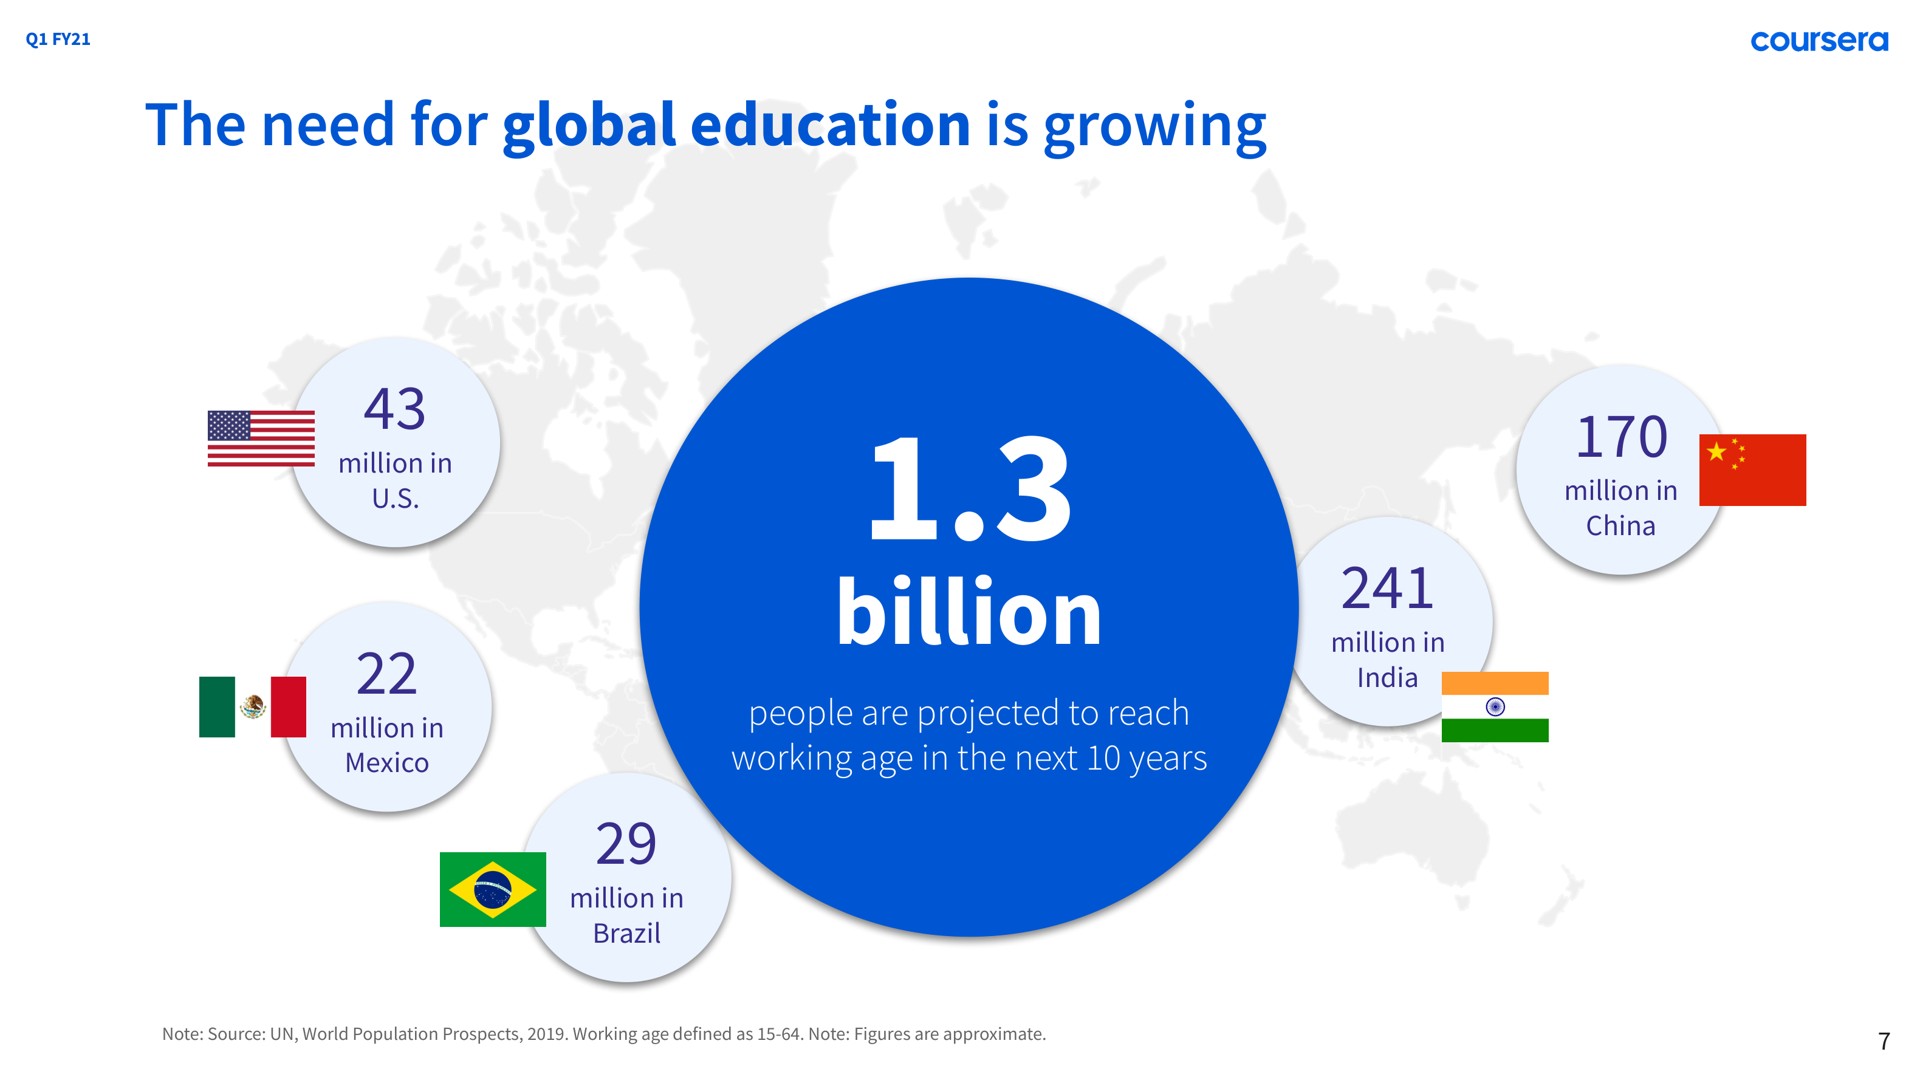 the need for global education is growing billion | Coursera